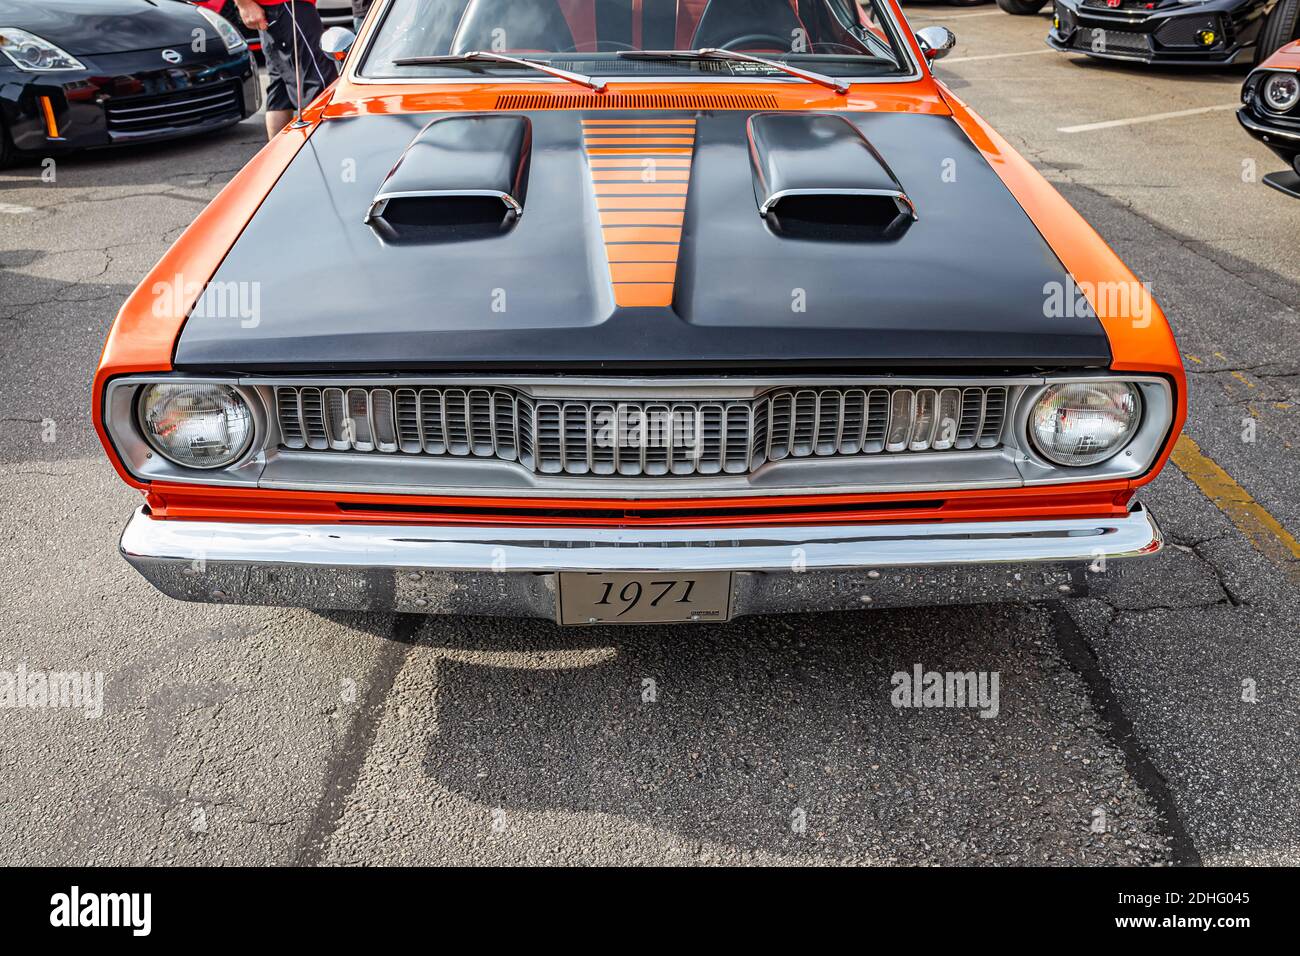 Tybee Island, GA - October 3, 2020: 1971 Plymouth Duster hardtop coupe  at a local car show. Stock Photo